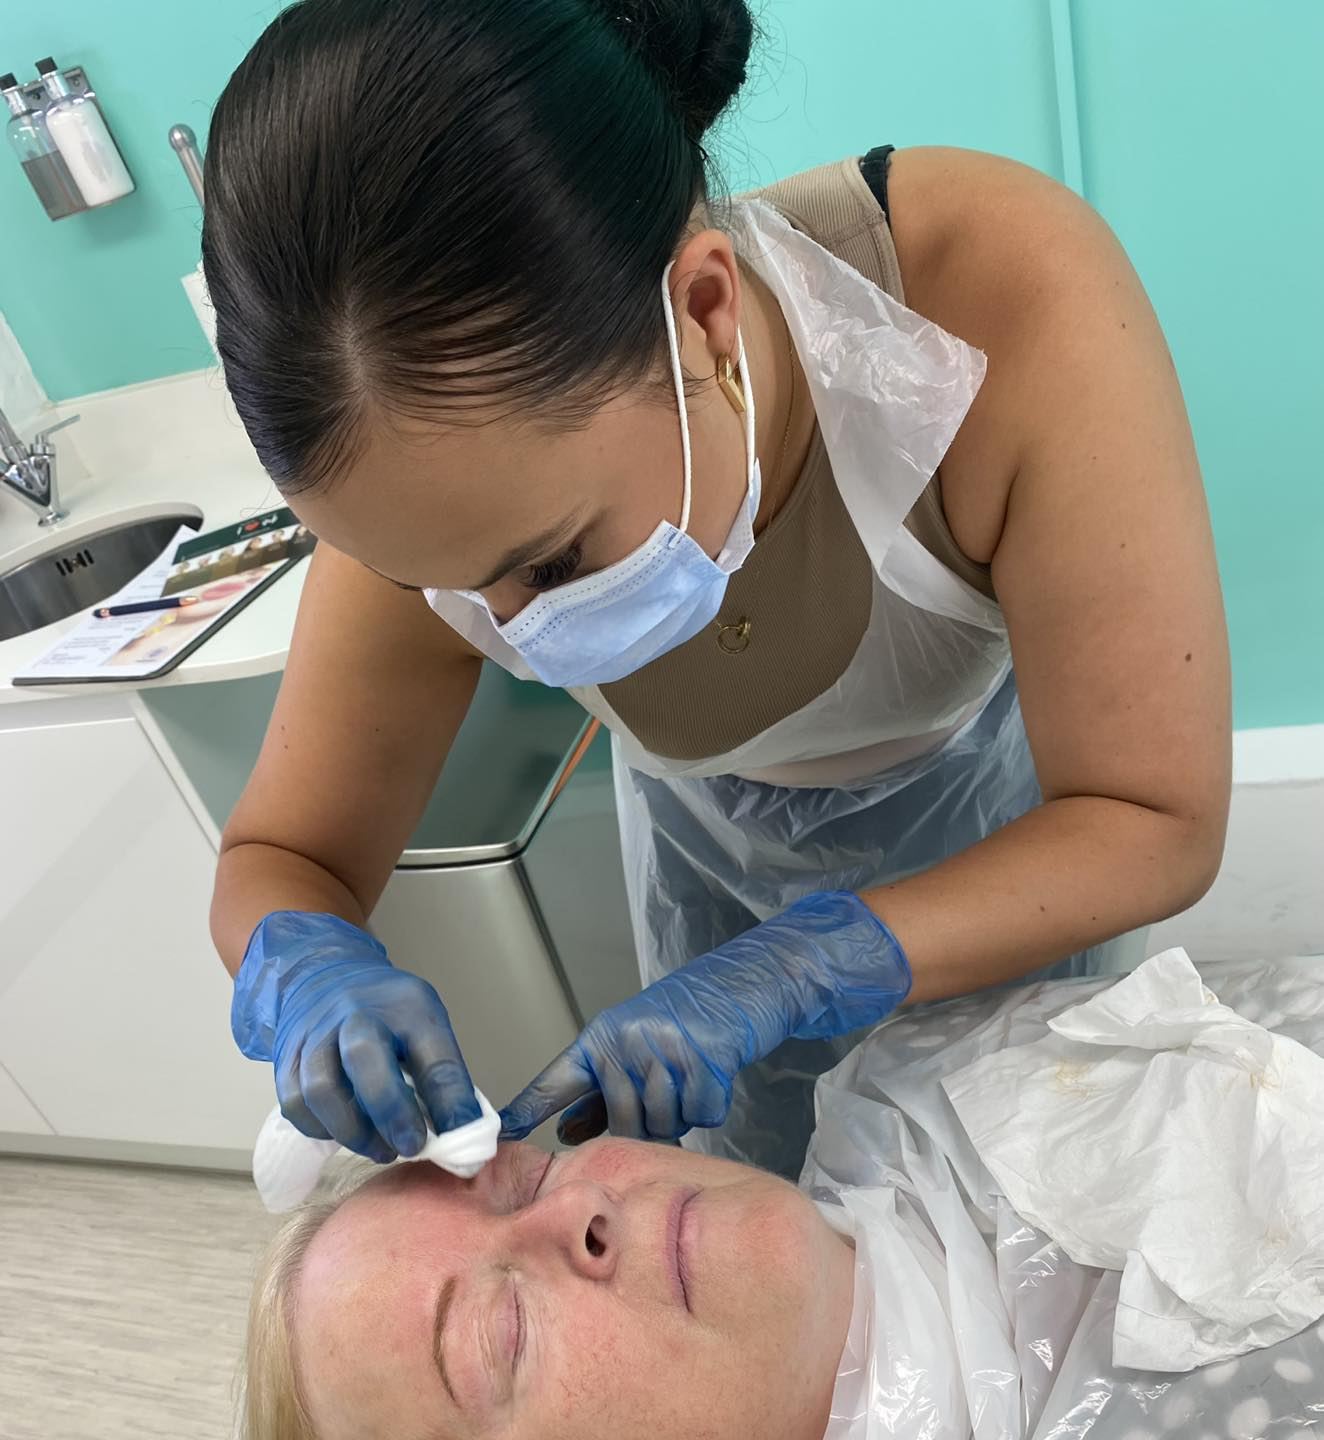 Georgia working on a client performing permanent makeup